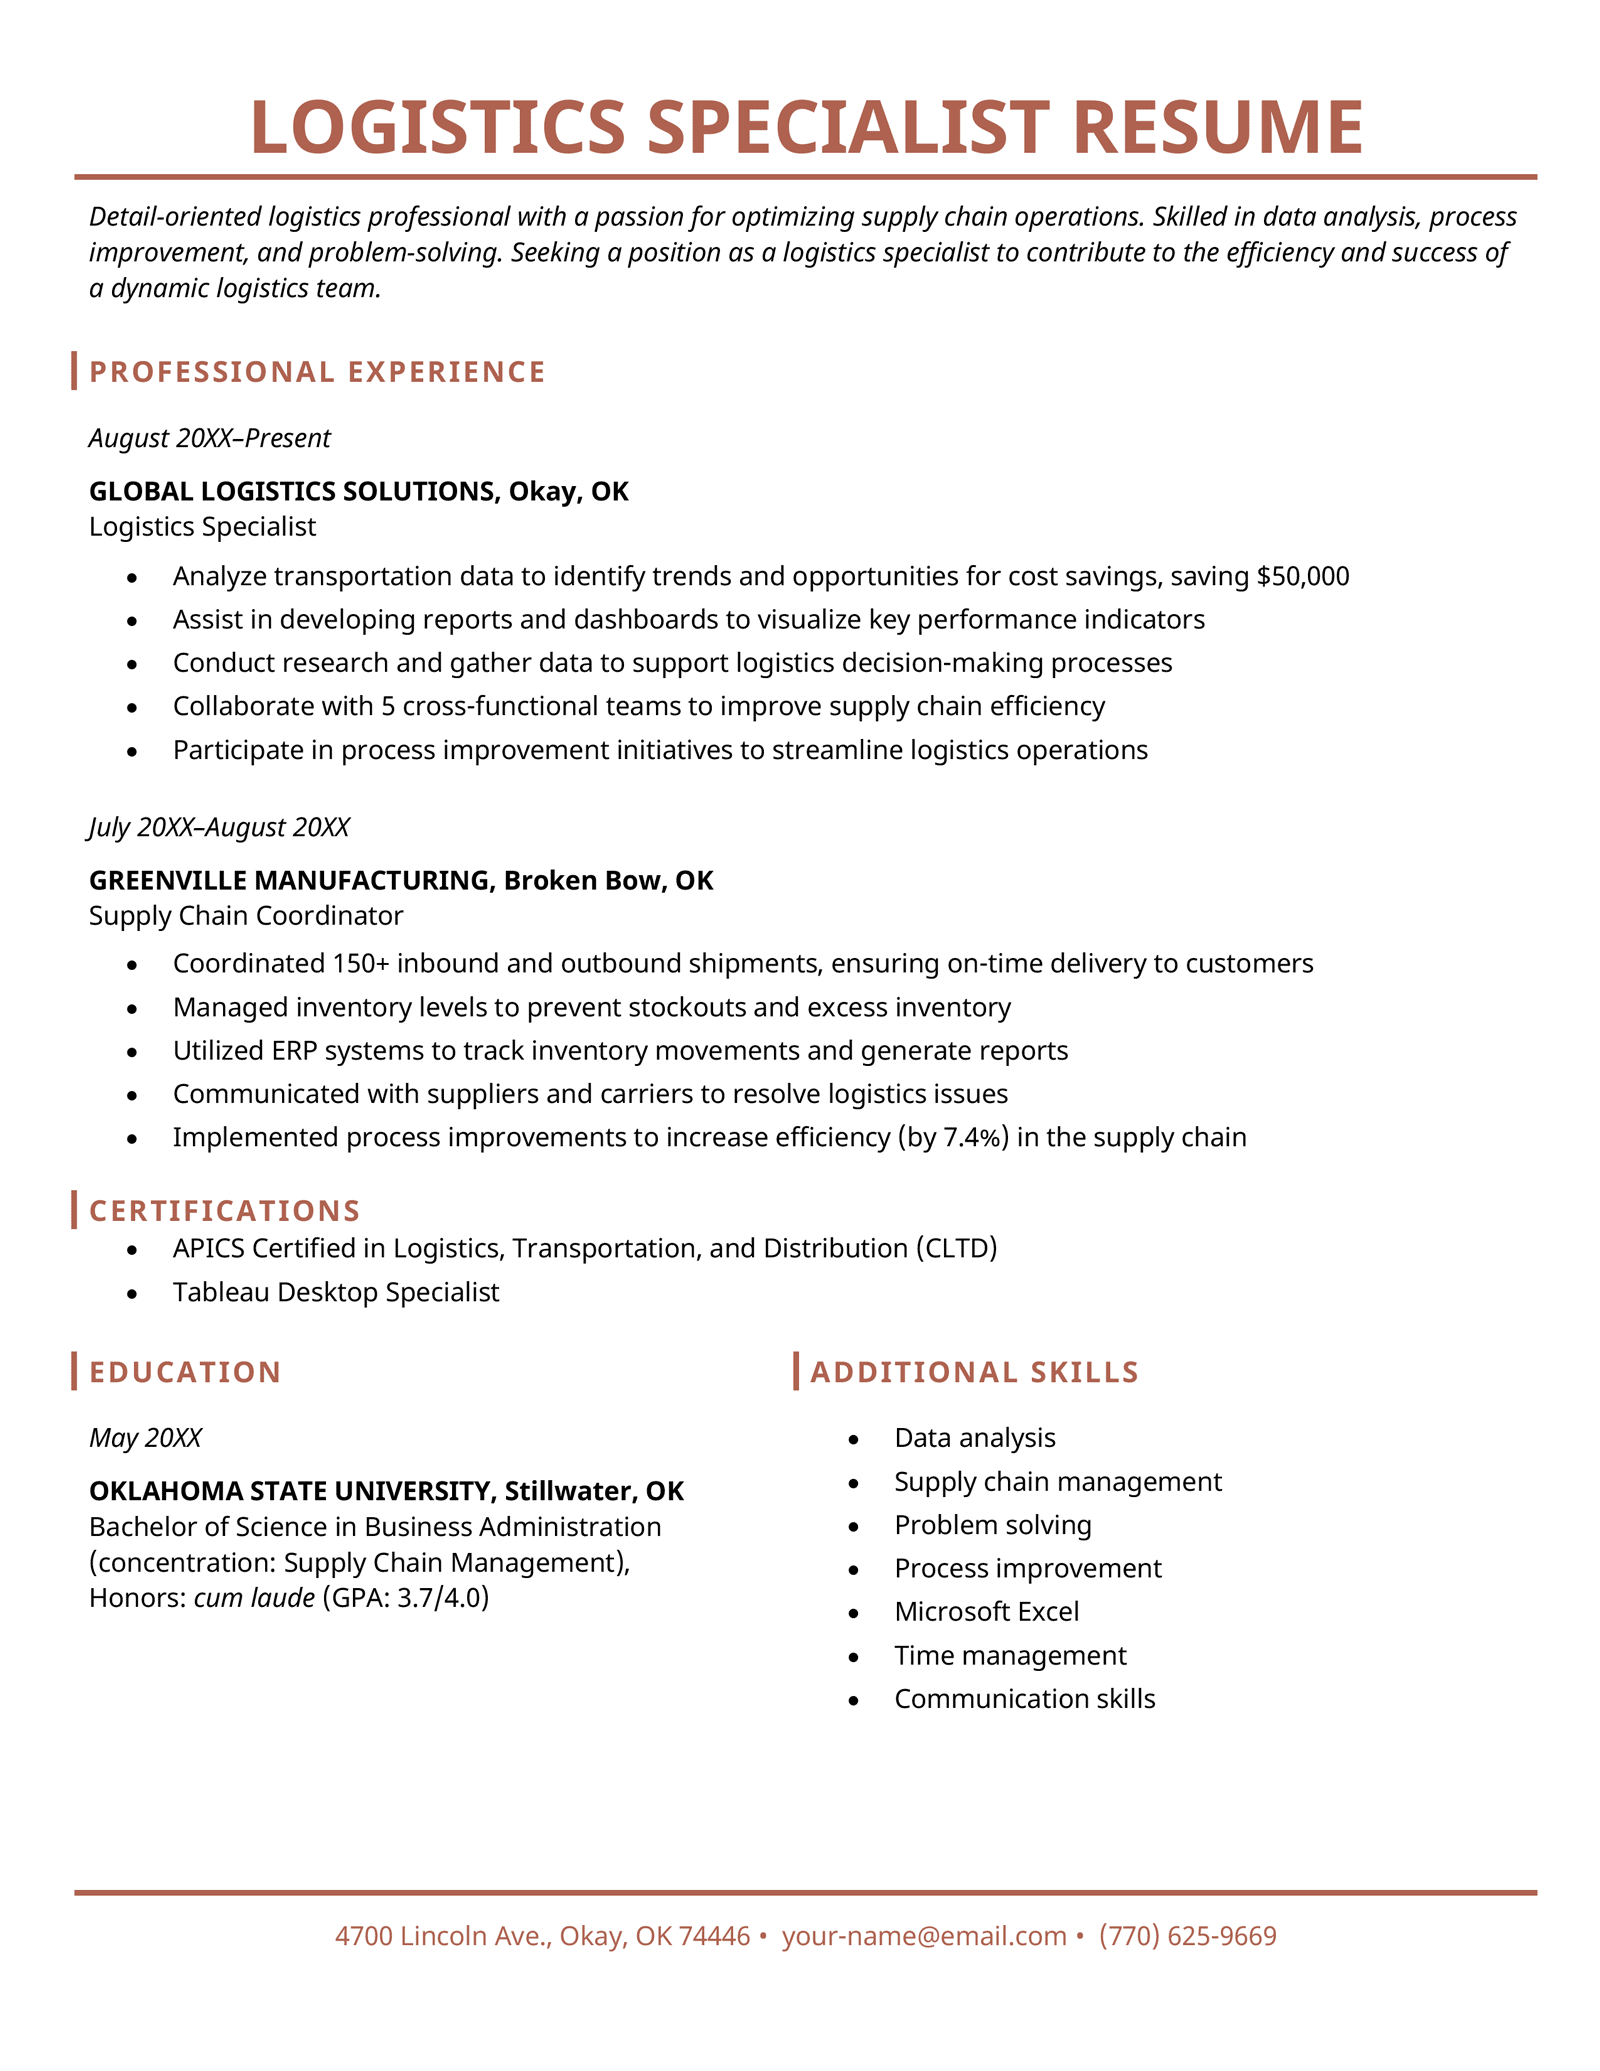 A logistics specialist resume example with a alternating one- and two-column design.